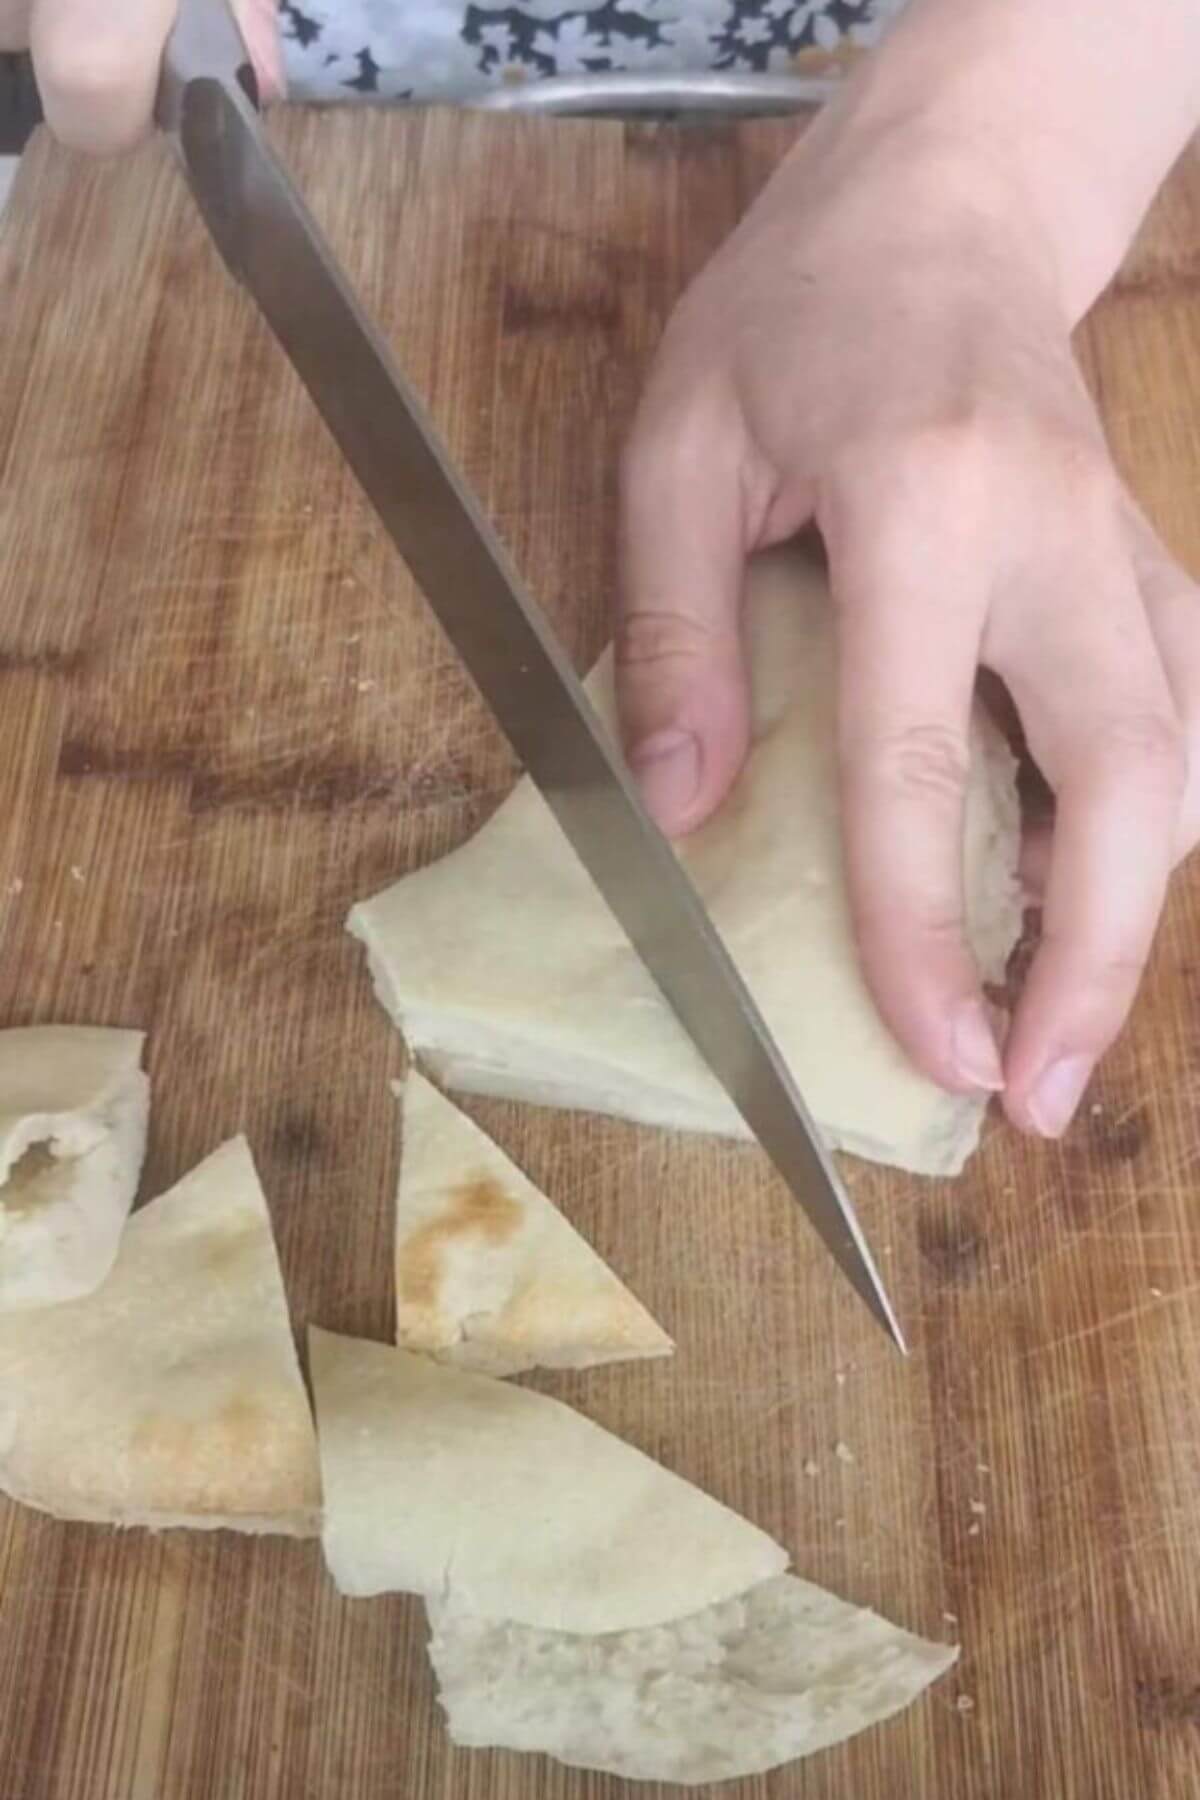 Hand holding knife and cutting pita bread into triangles.